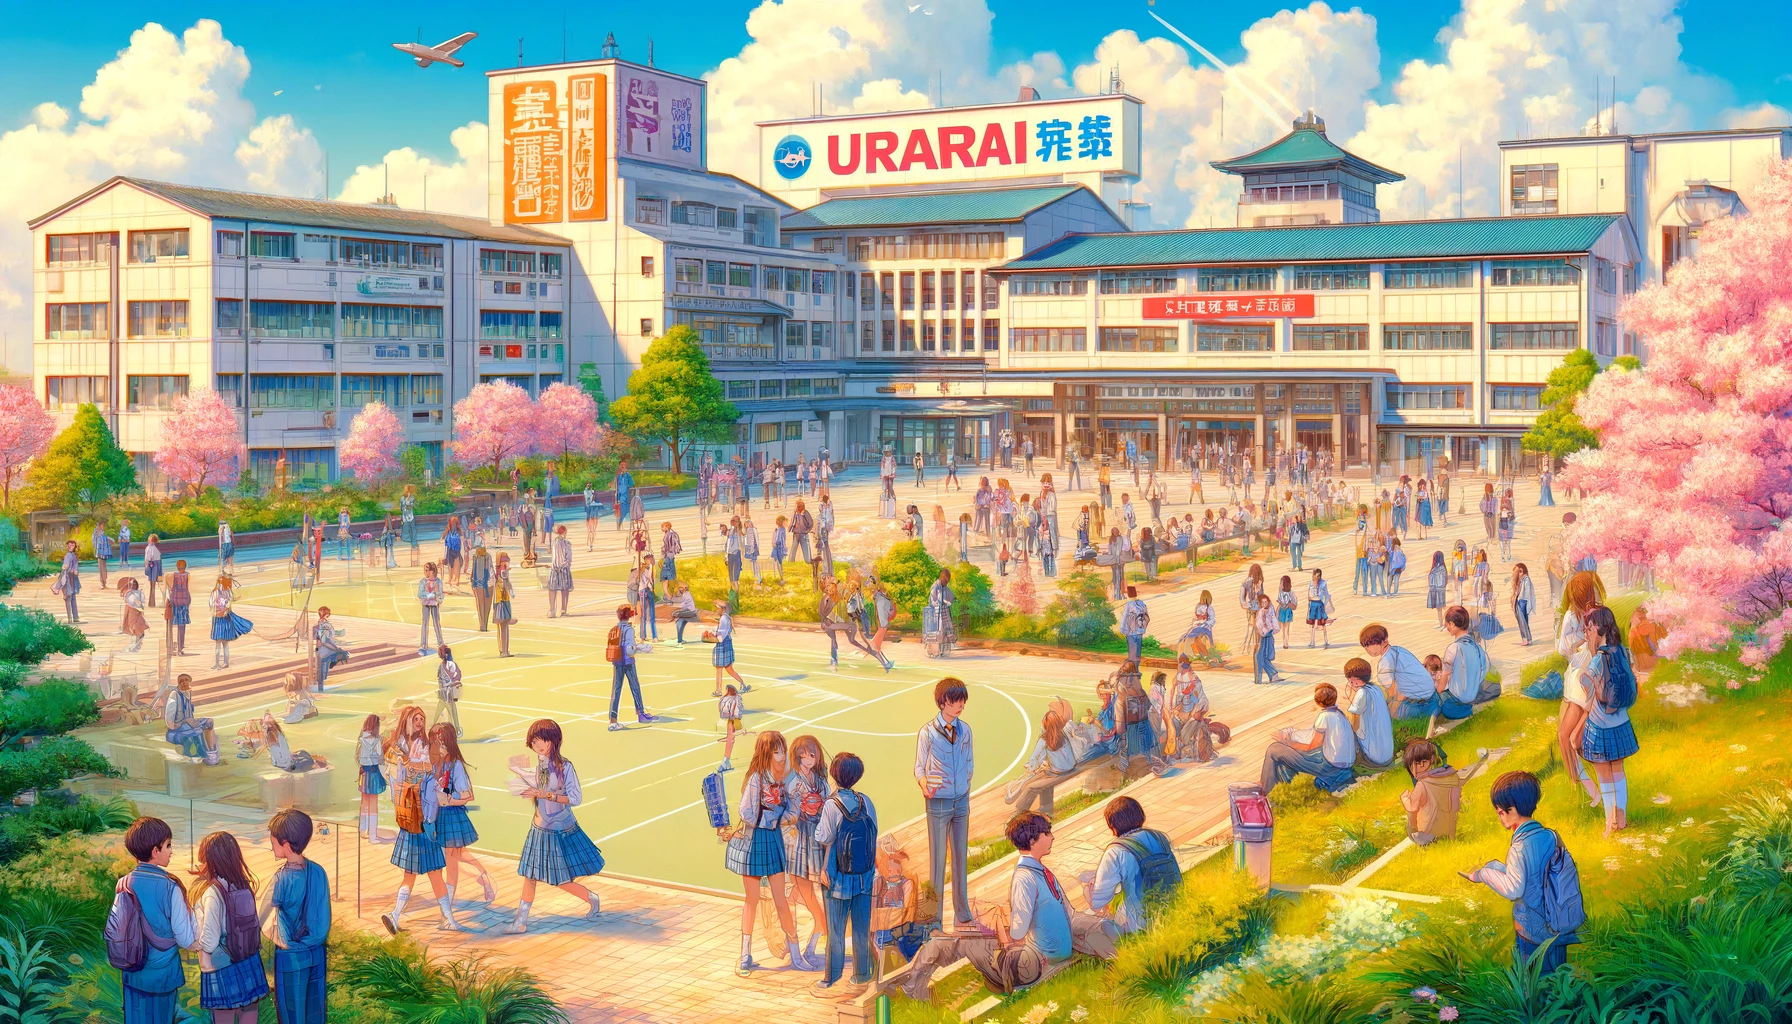 A vibrant high school campus scene showing the popularity of Urawai High School in Japan, with the word 'Urawa' prominently displayed in the sky. The image features a diverse group of students of various Asian descents, wearing colorful school uniforms, engaged in various outdoor activities. Students are depicted socializing, studying, and participating in sports on a spacious campus with a mix of modern and traditional architectural styles. The campus is lush with greenery and cherry trees in bloom, adding to the lively atmosphere. The scene is bustling, portraying a well-liked and active school environment.